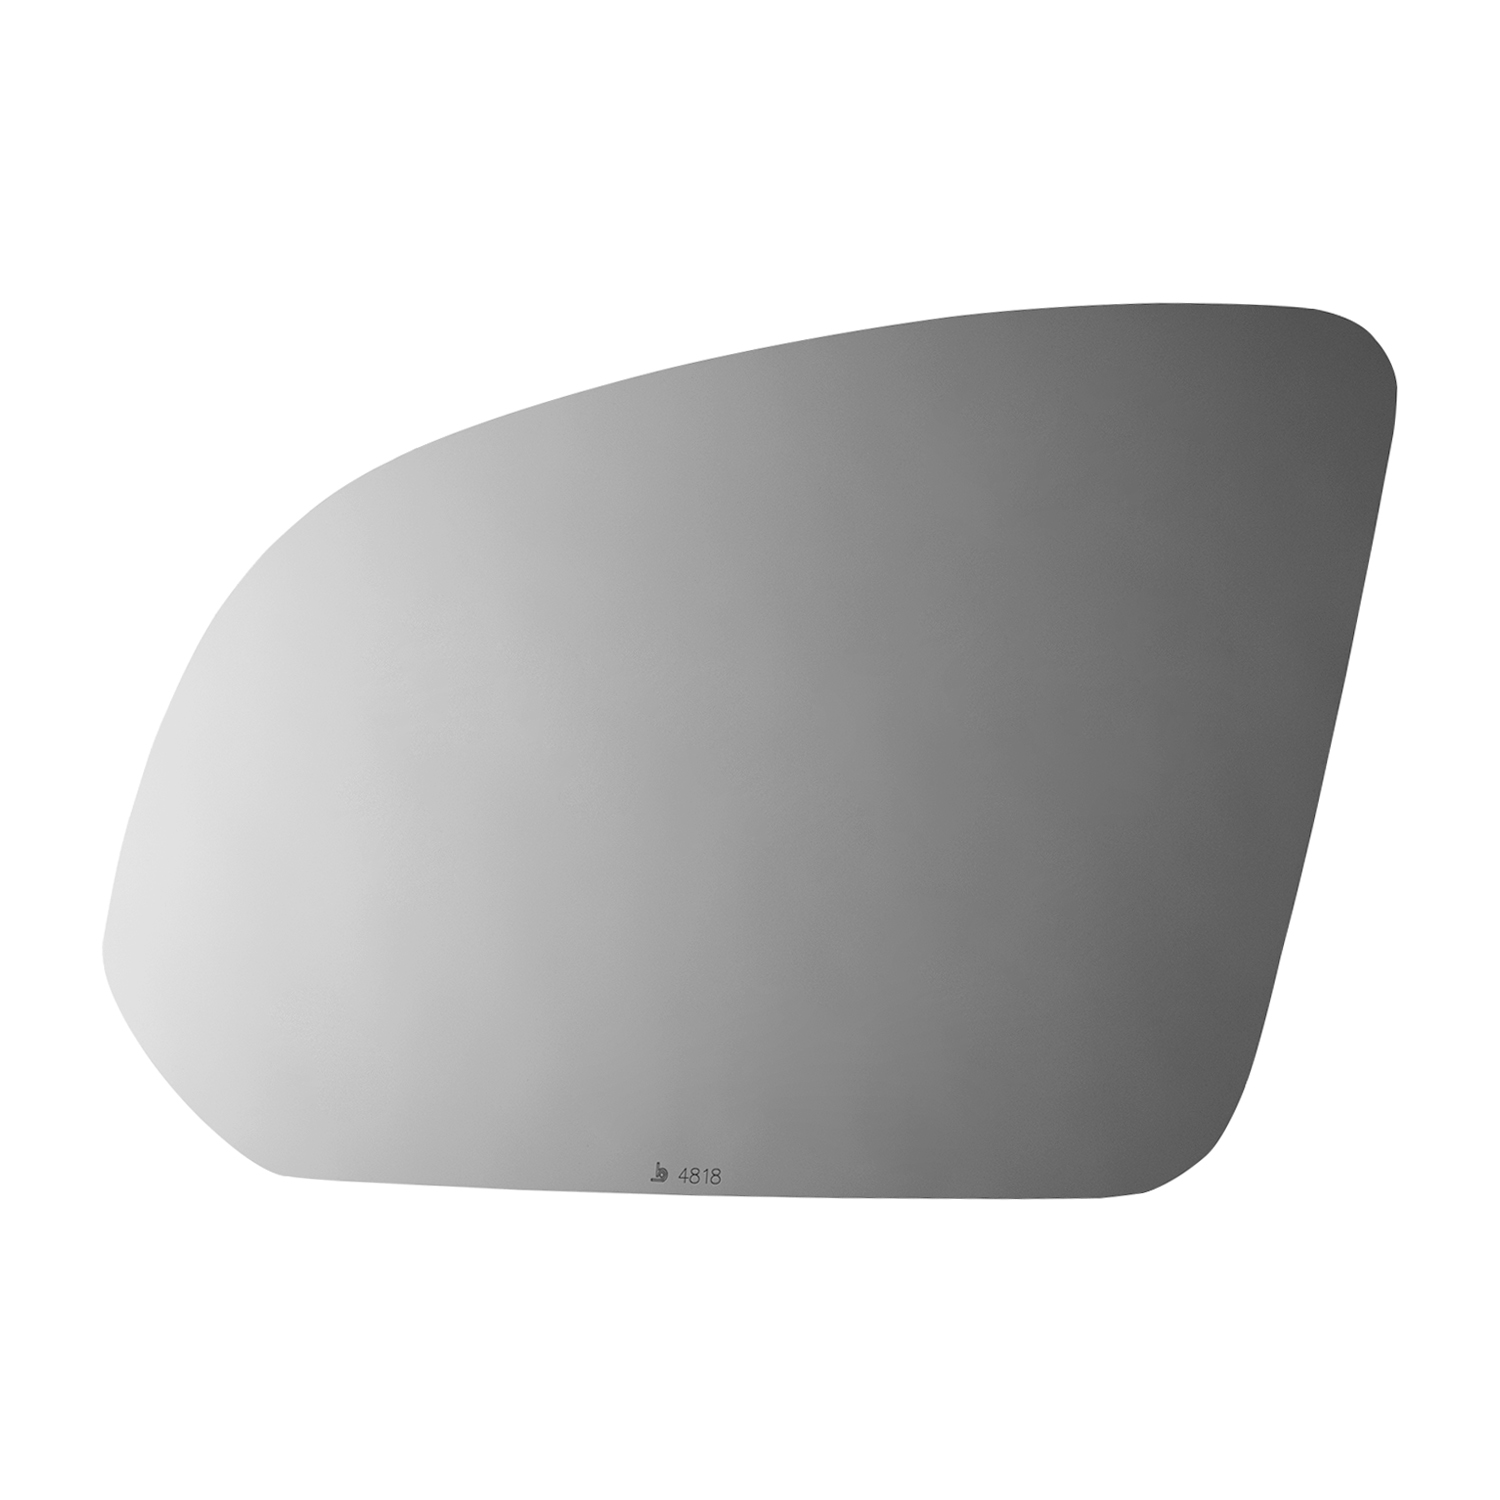 4818 SIDE VIEW MIRROR